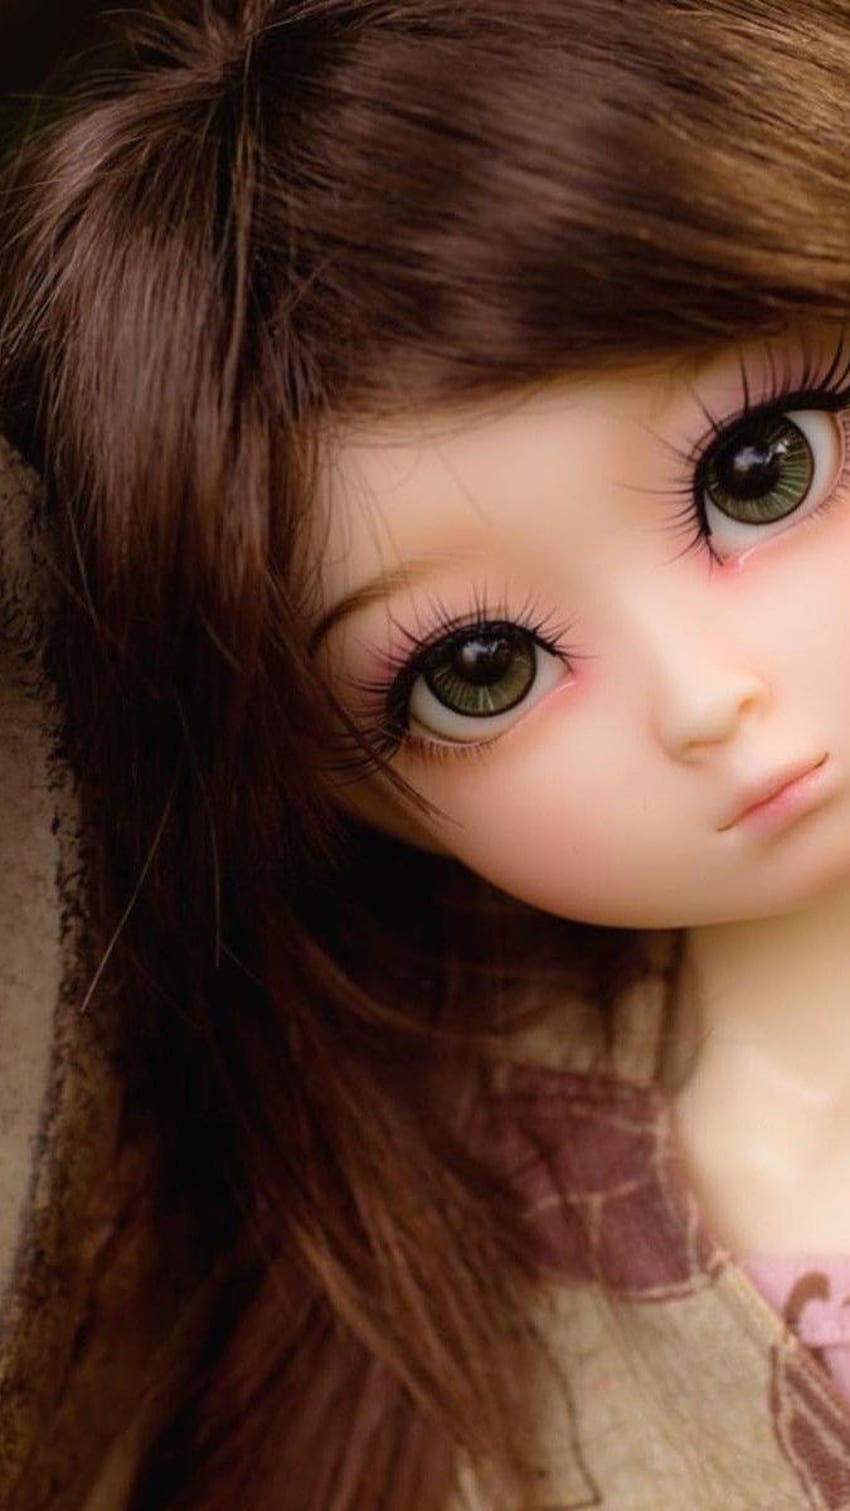 Doll looking lovely cute and innocent, iphone doll HD phone wallpaper